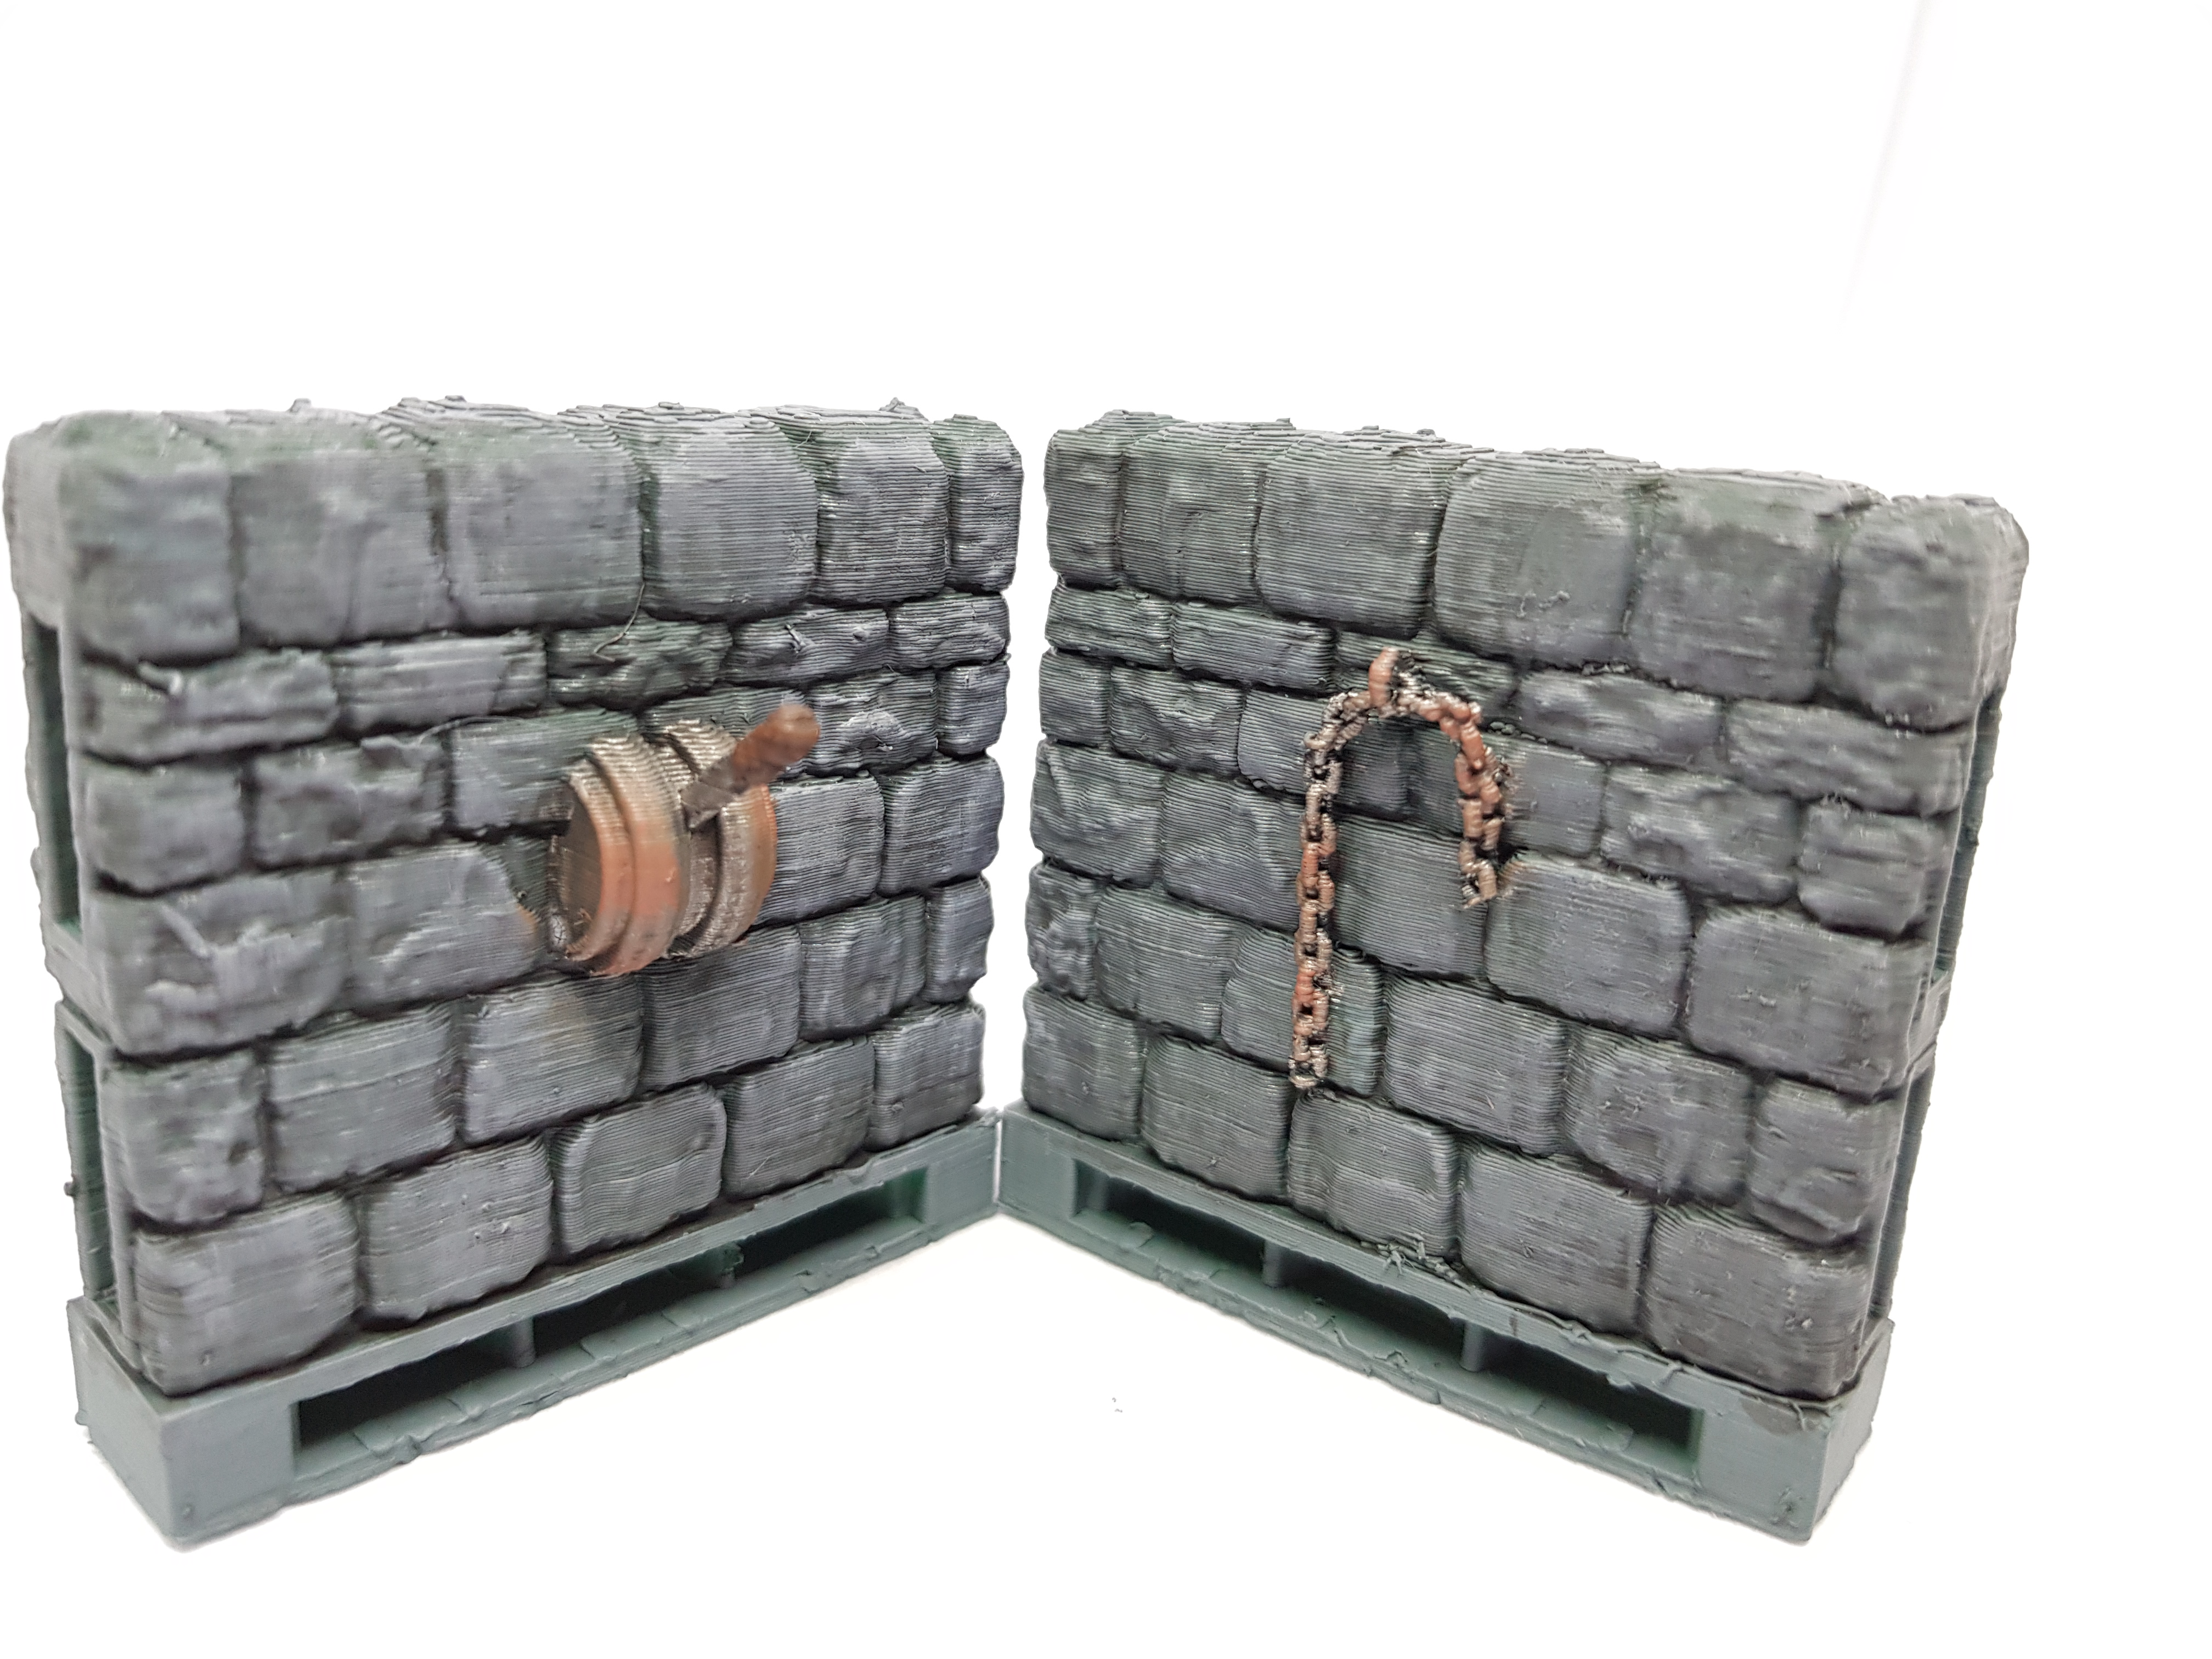 Image of Dungeon Stone walls with Levers and Chains